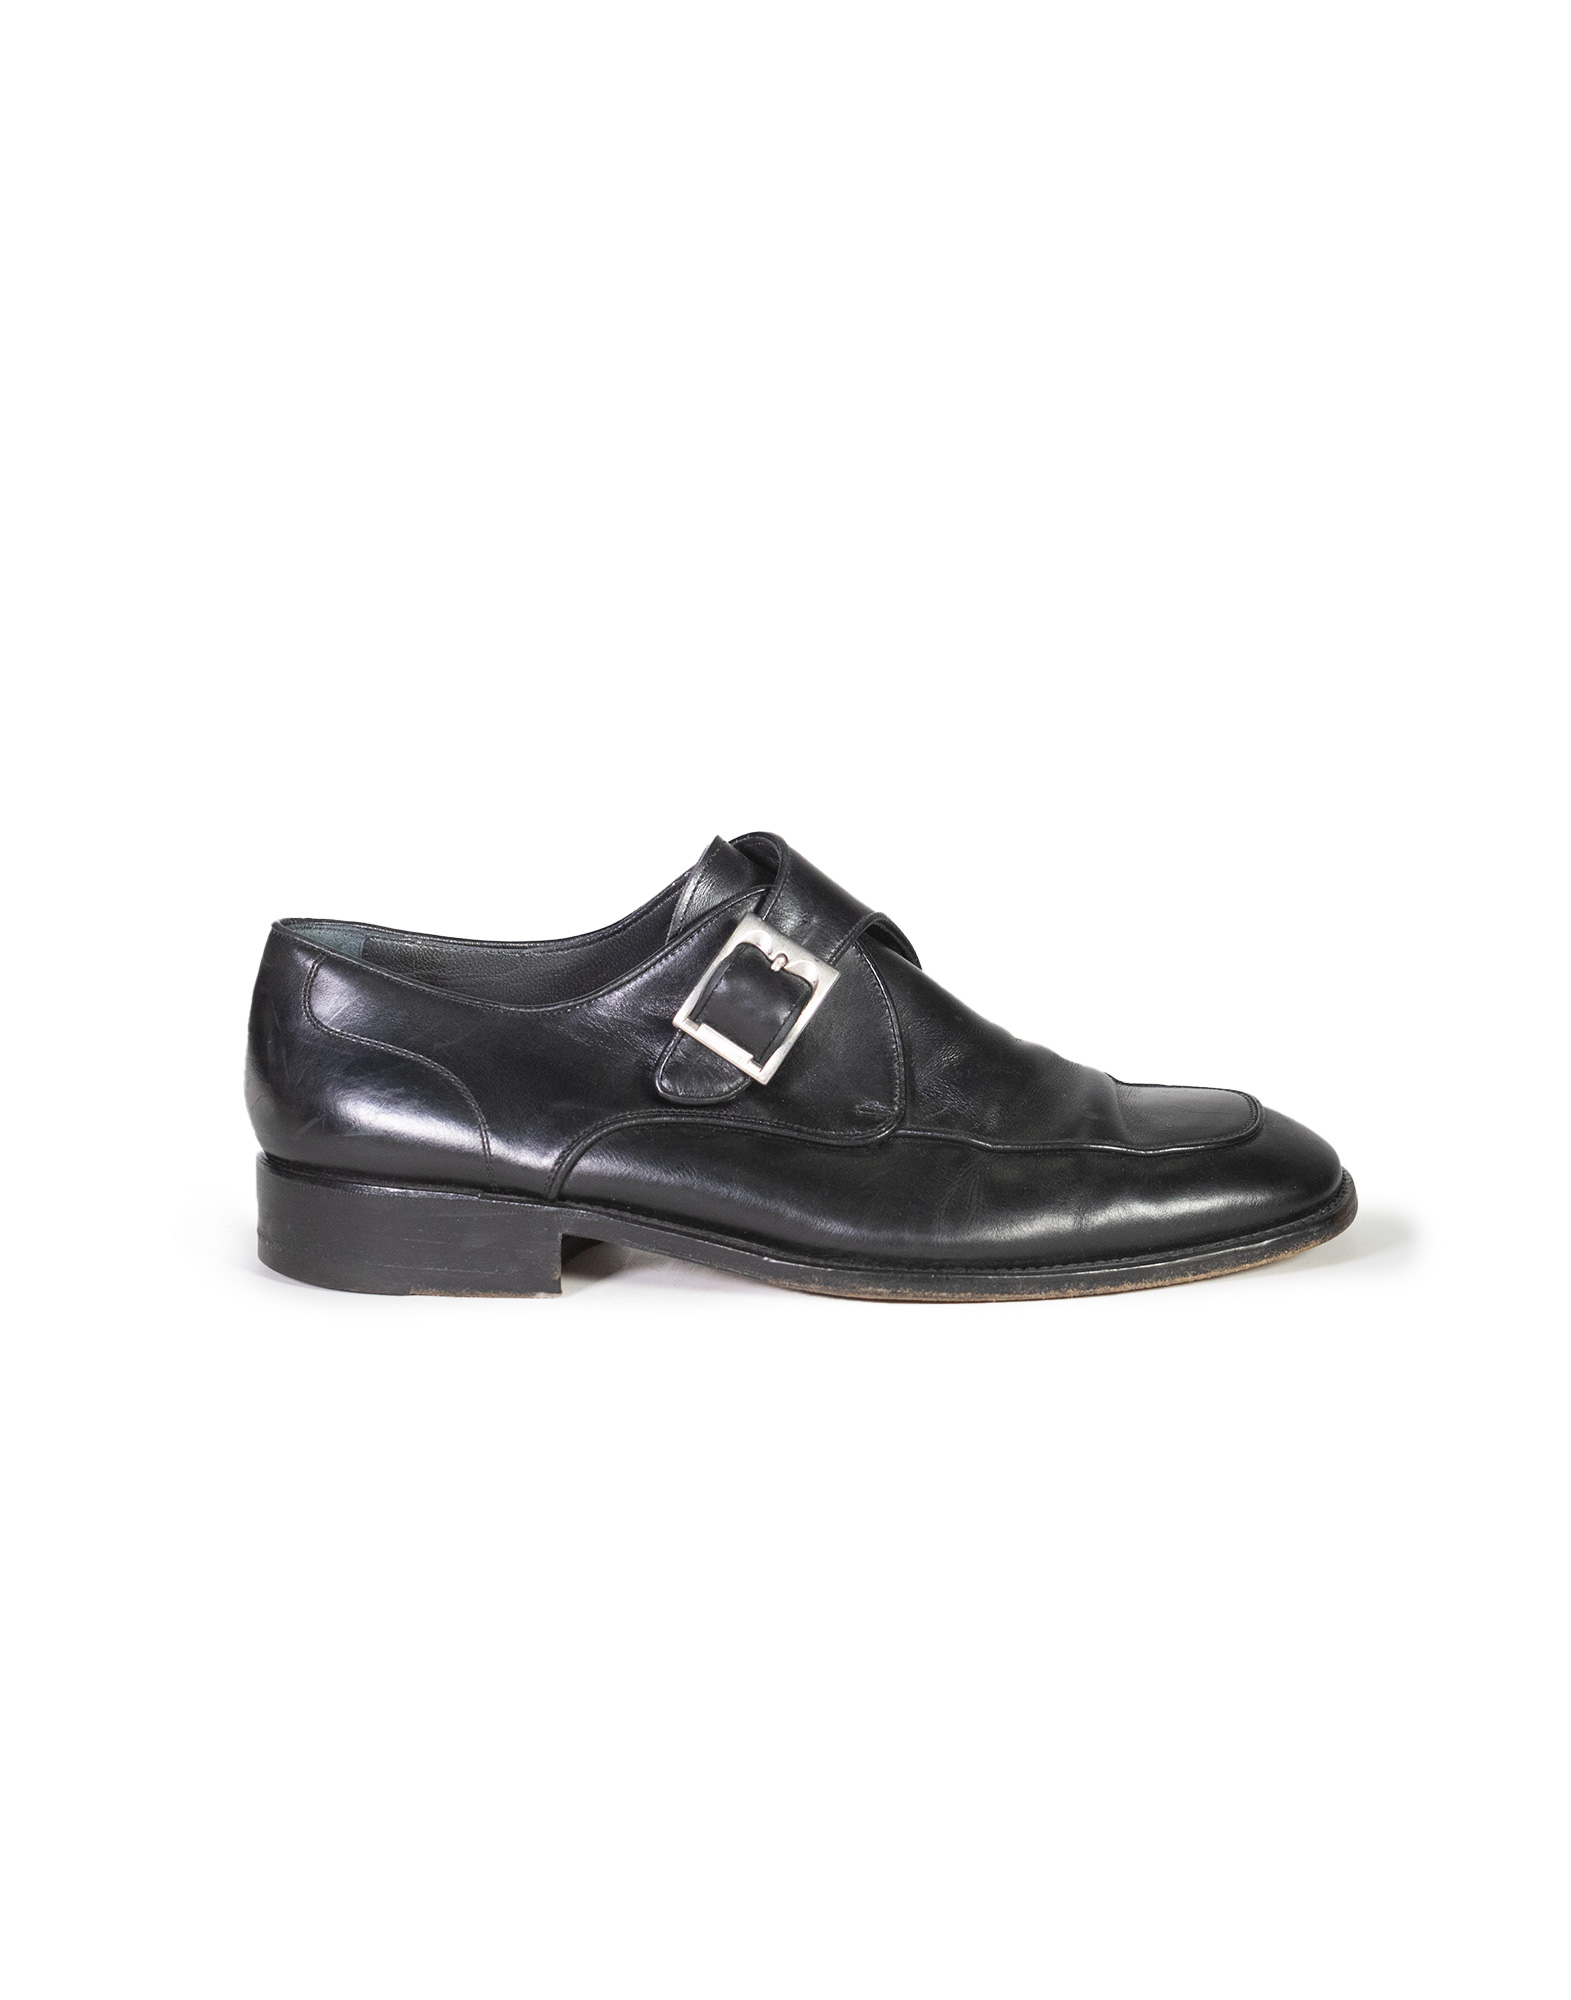 Bally - Leather man shoes